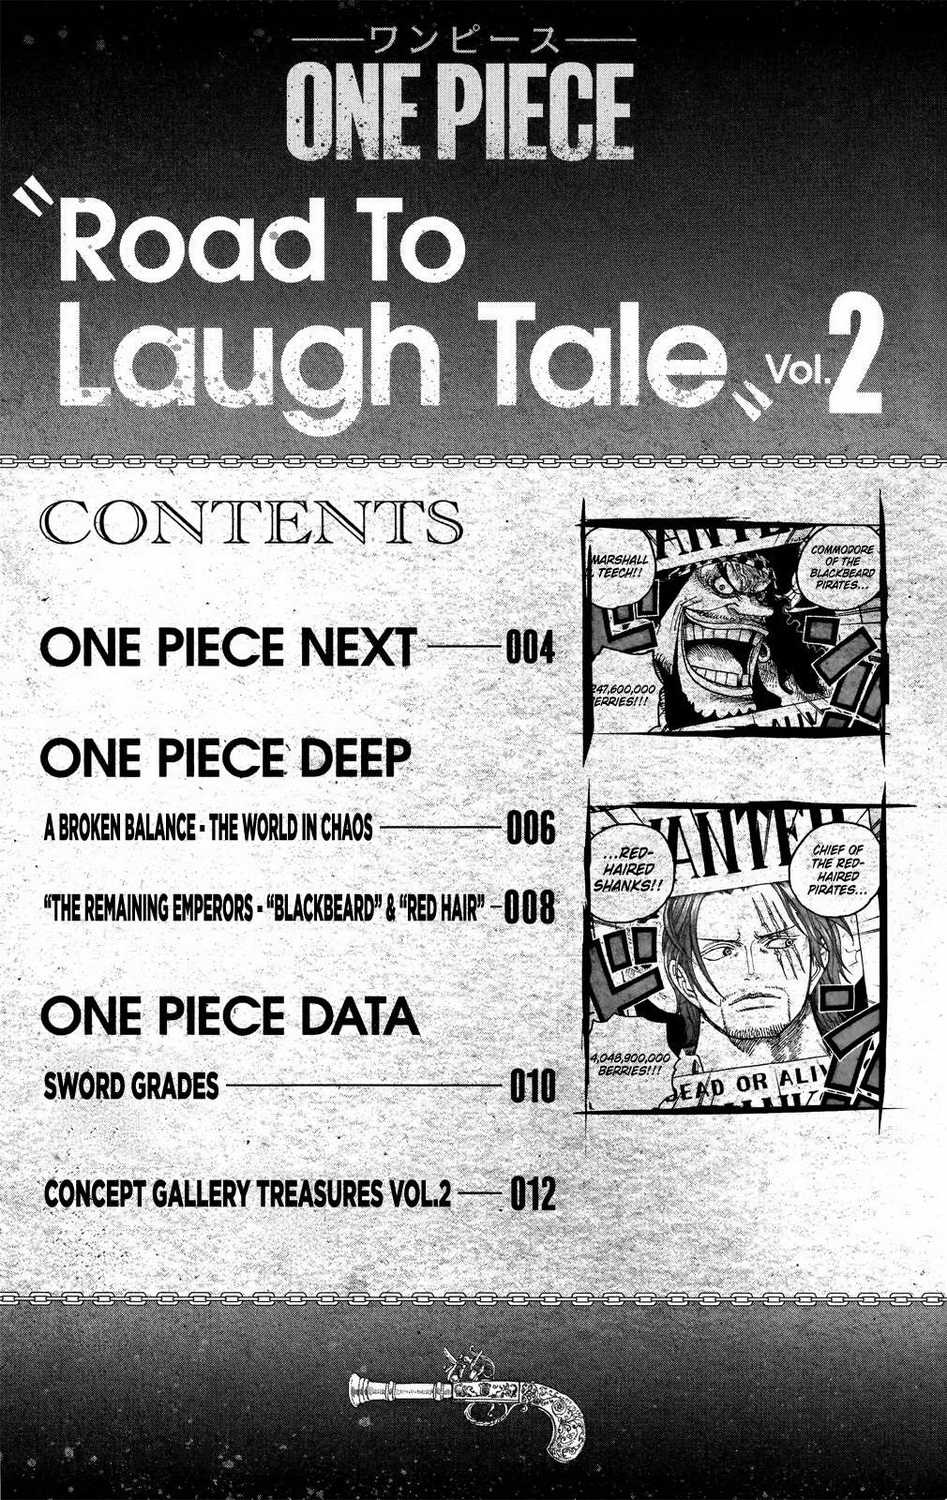 Road to Laugh Tale vol 2